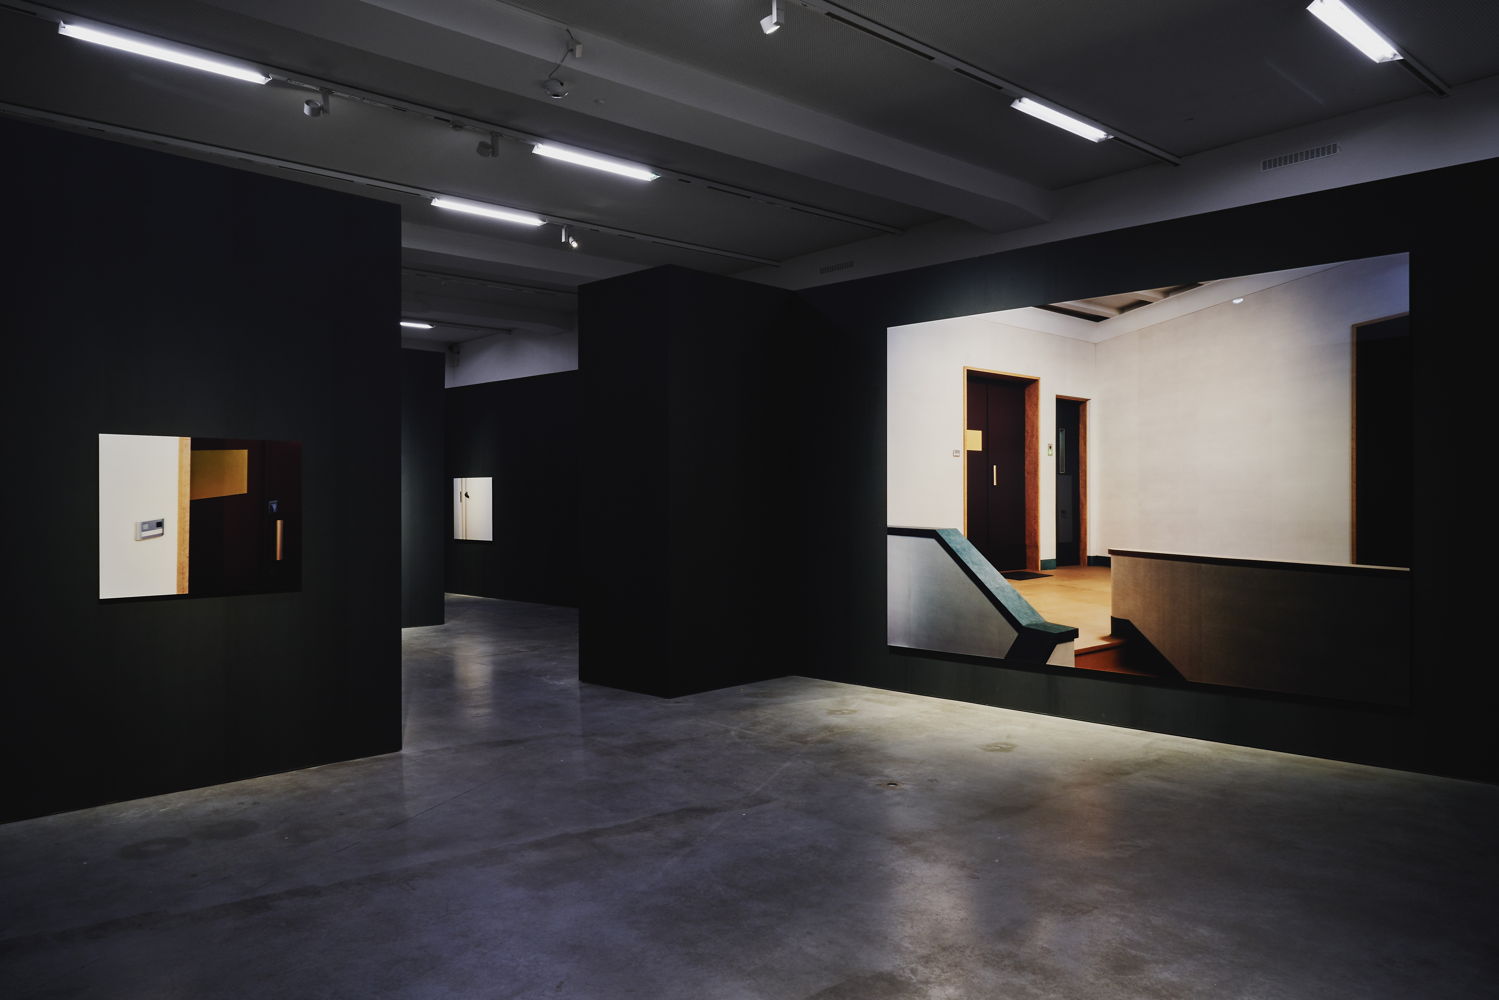 Installation view 'HOUSE OF CARD' at M © Dirk Pauwels